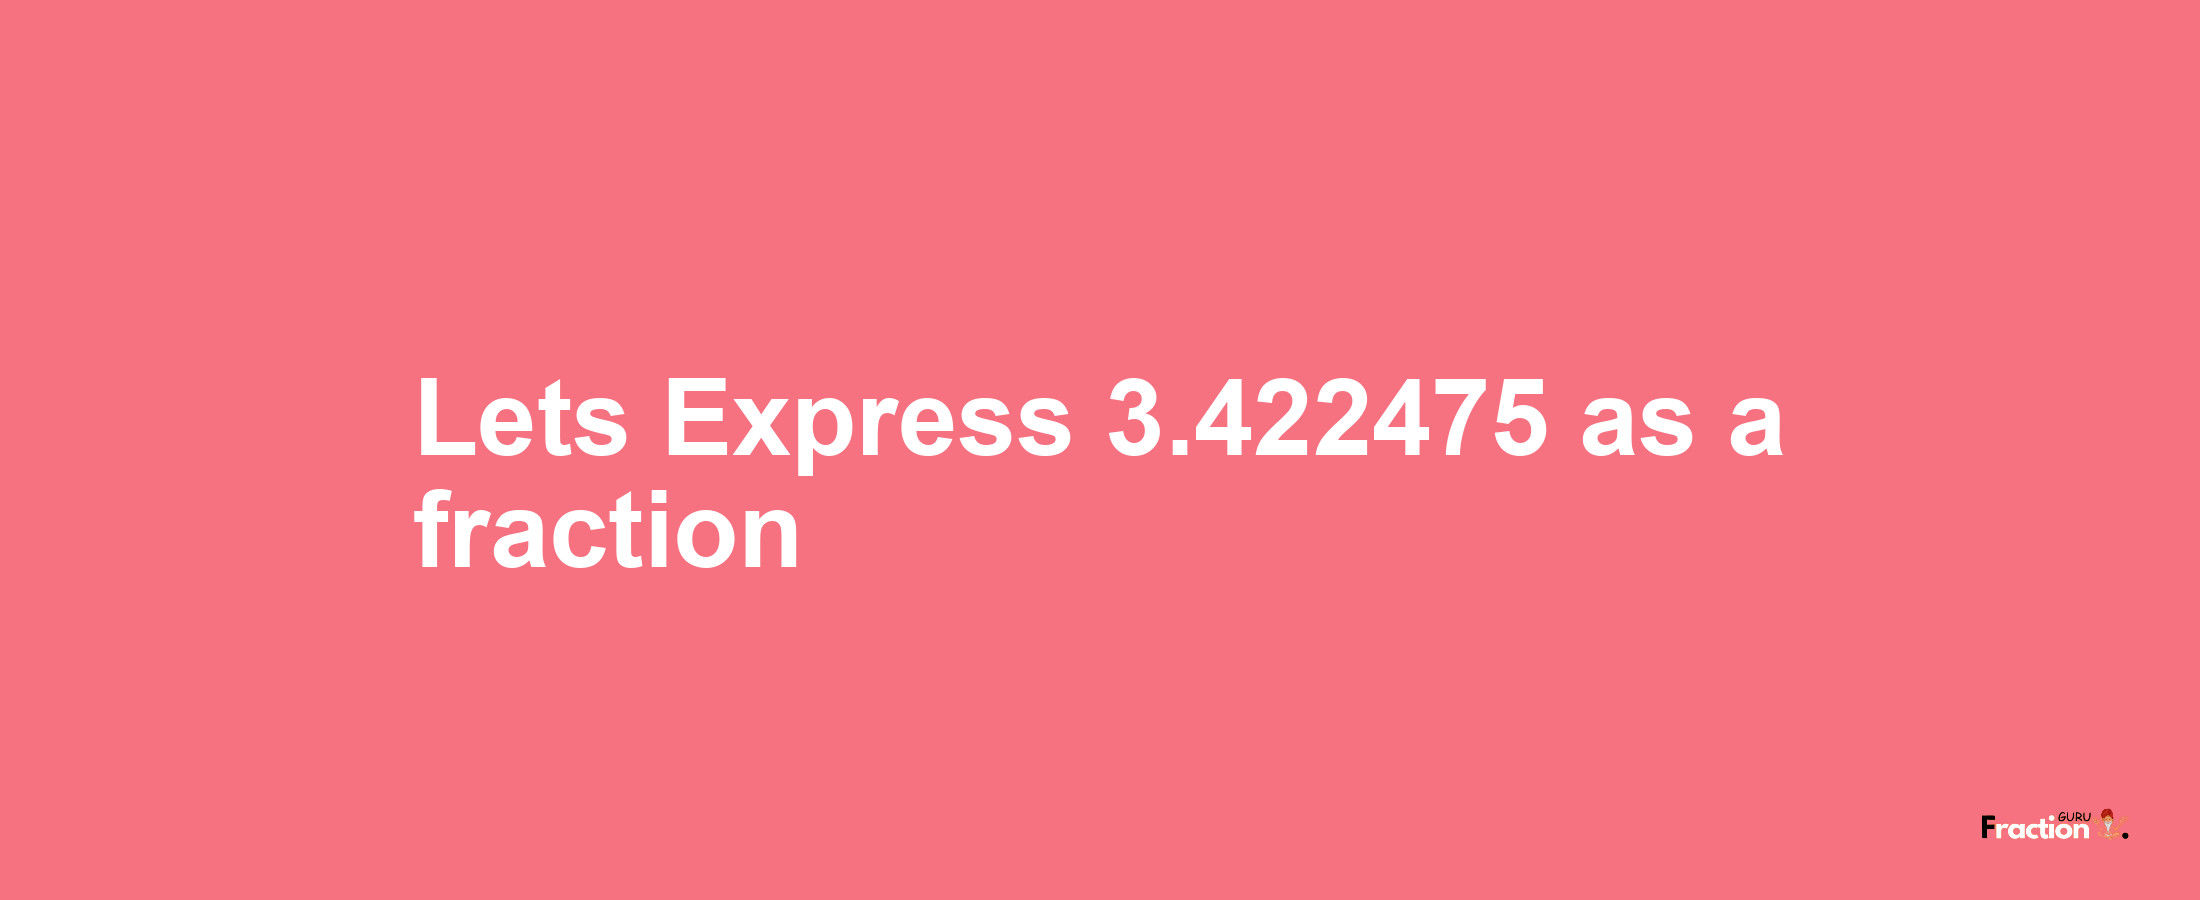 Lets Express 3.422475 as afraction